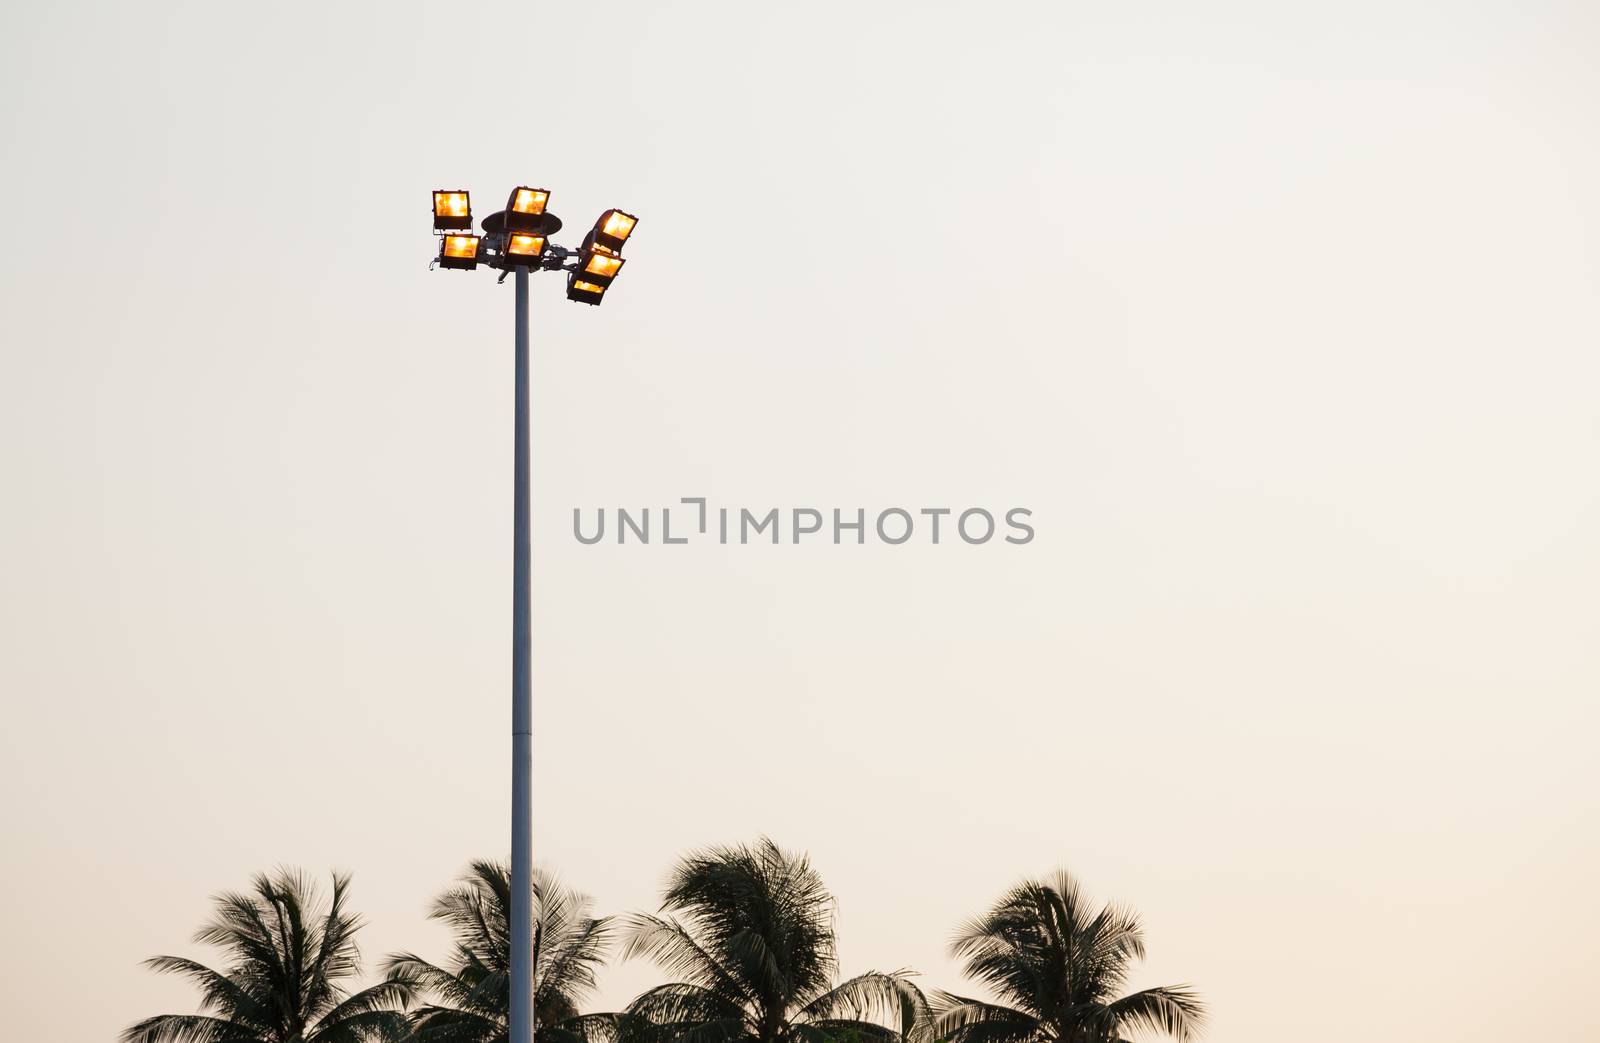 lantern on top of poles by a454